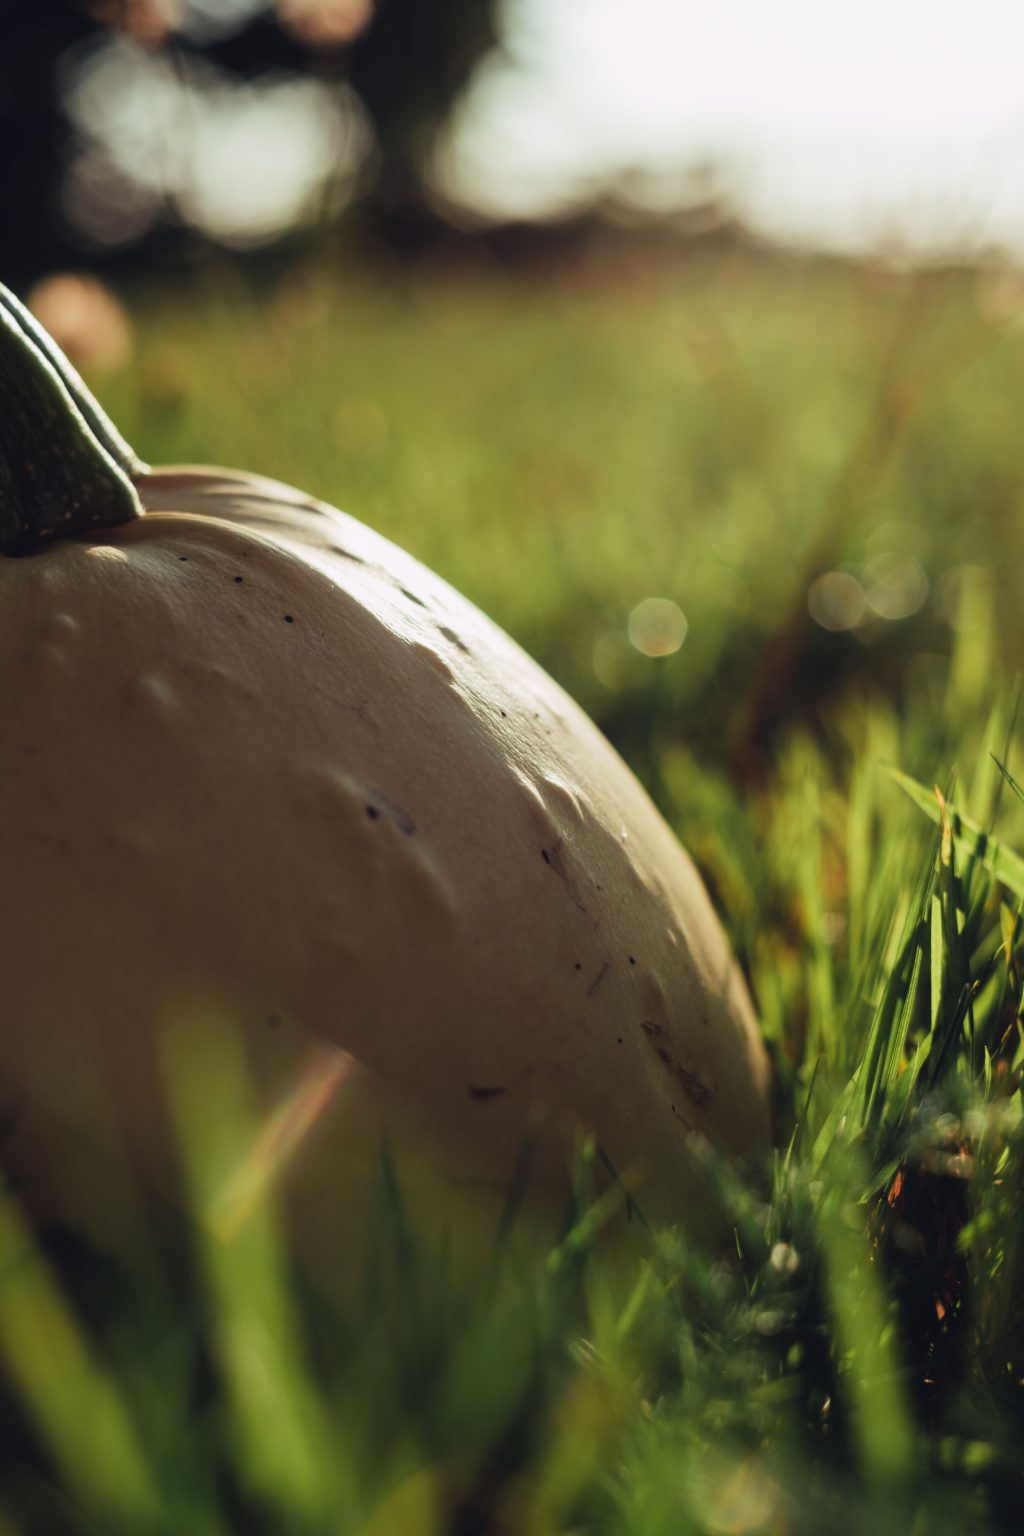 Pale yellow pumpkin on the grass 7 - free stock photo